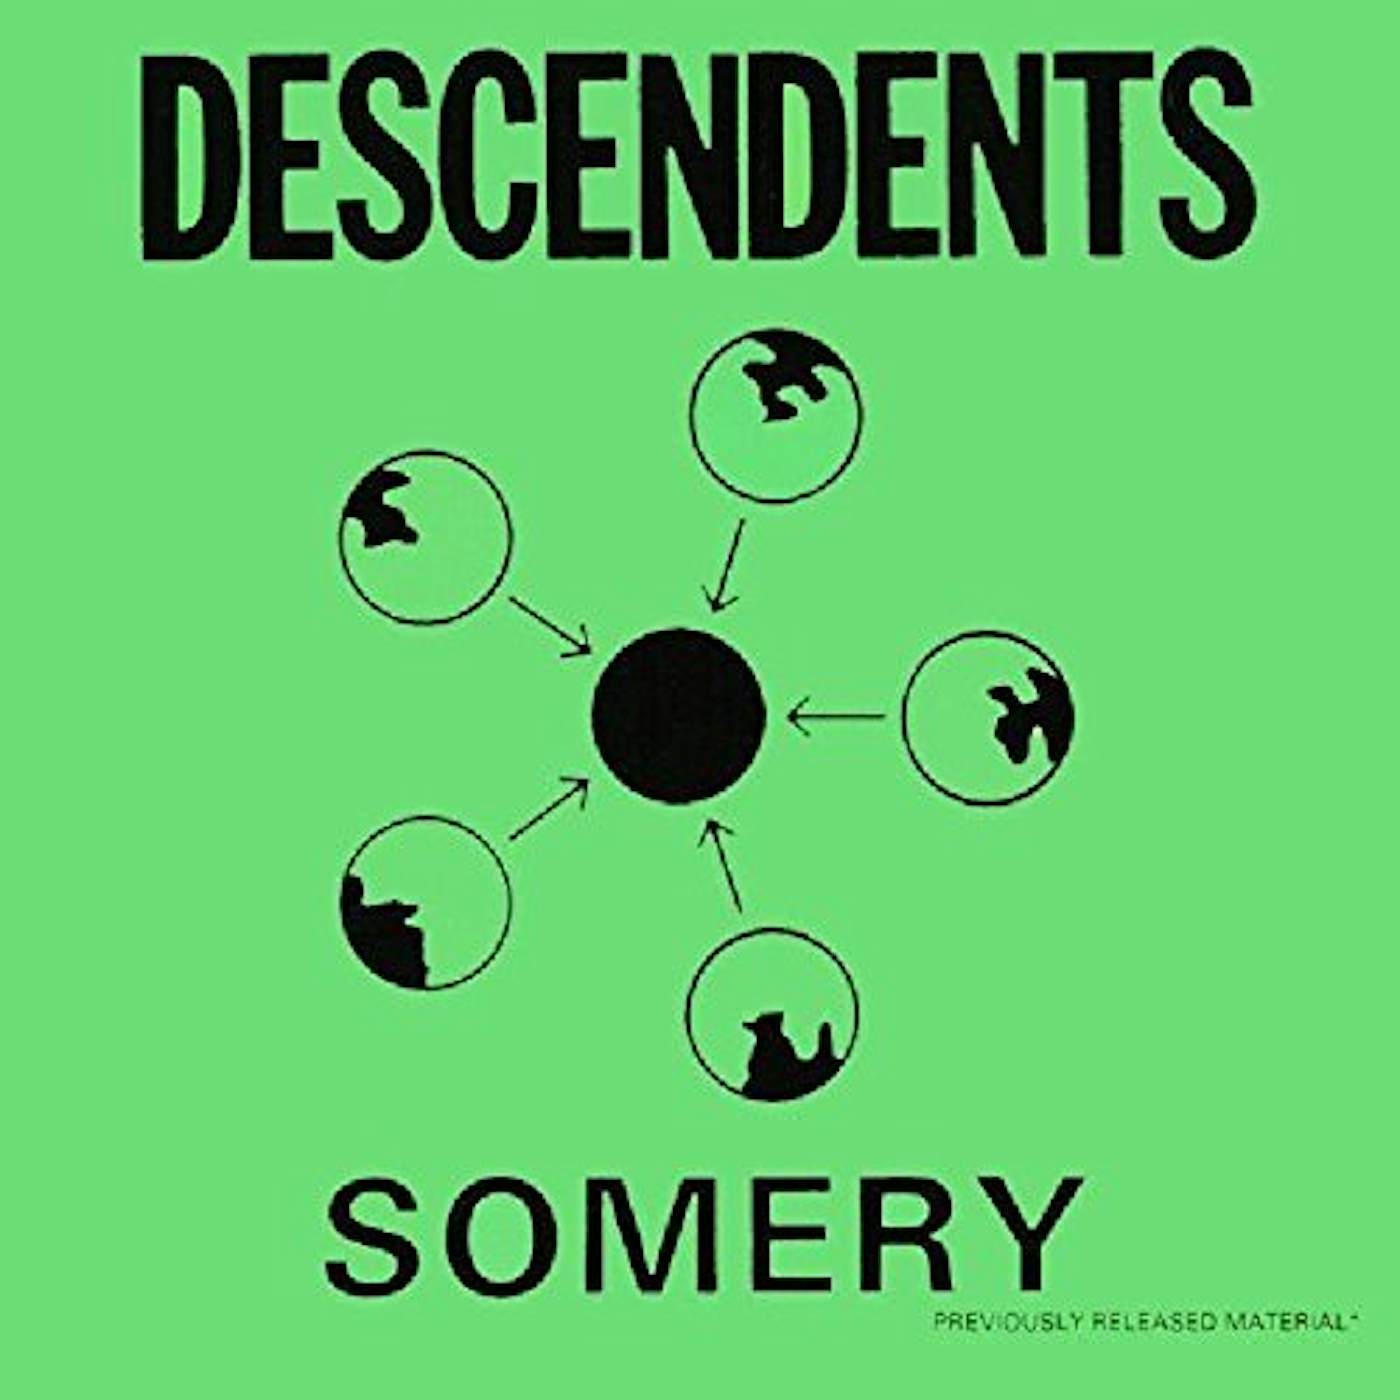 Descendents - Somery 2 x lp - the edges of the cover have very light wear from shipping to the vendor (Vinyl)